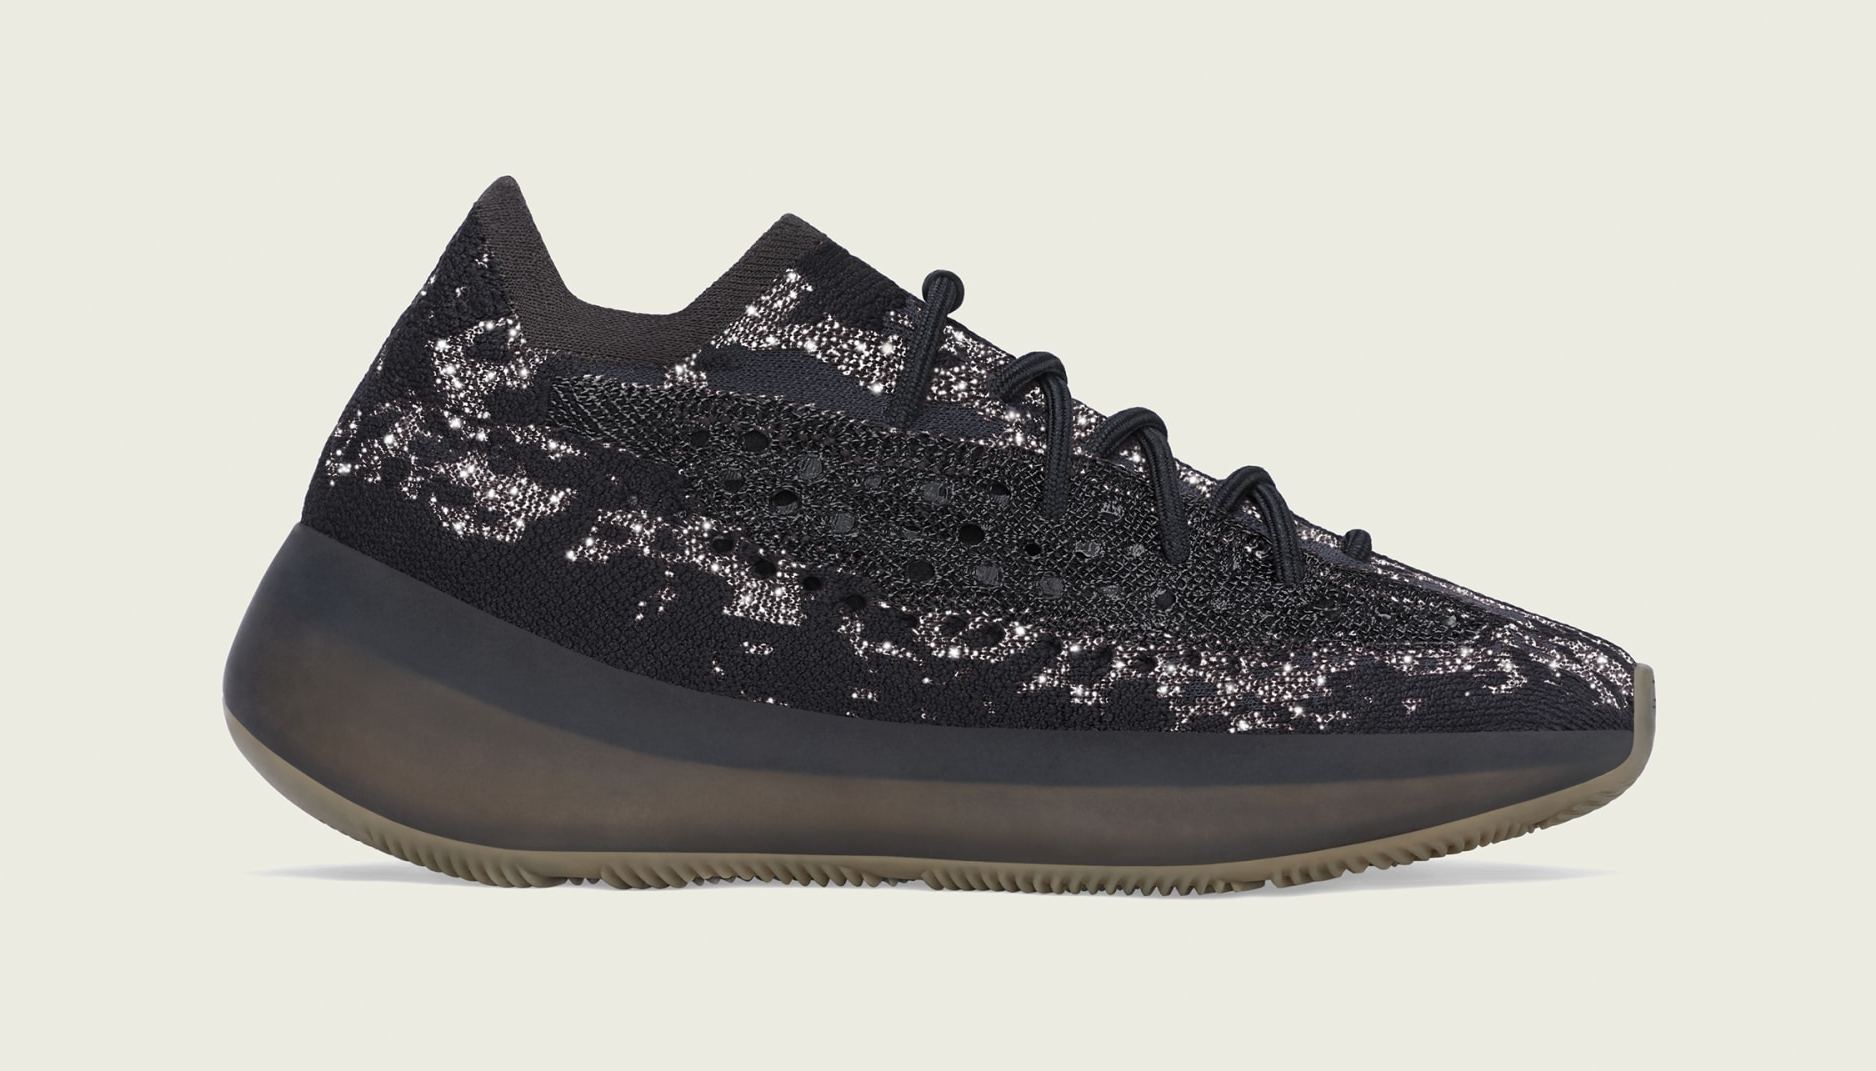 Two Versions of the 'Onyx' Yeezy Boost 380s Are Releasing Soon